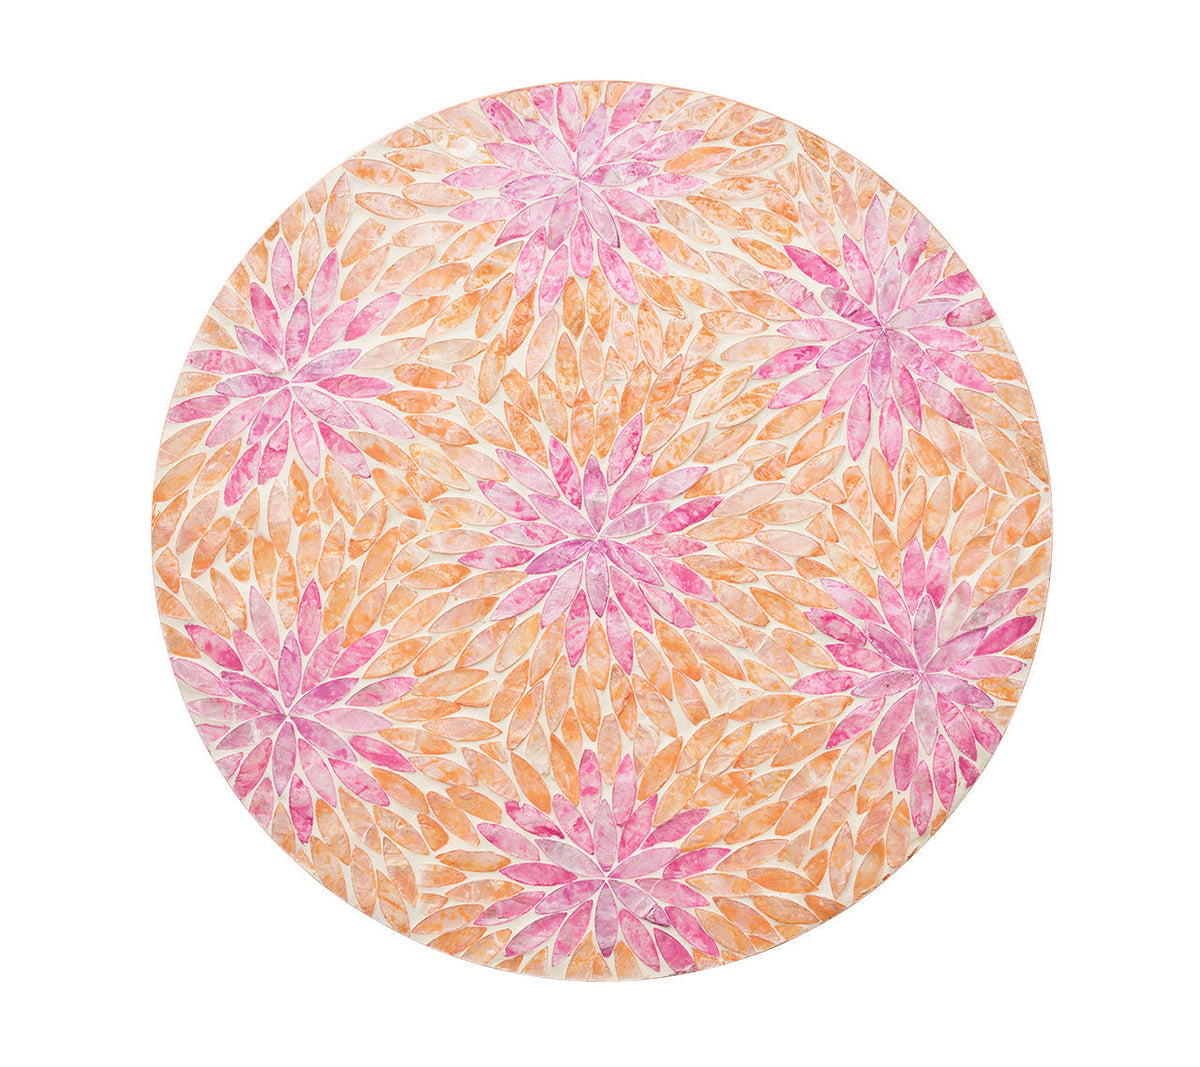 Round Flora Placemat with pink and orange Capiz shells arranged to resemble petals of a spring flower. 